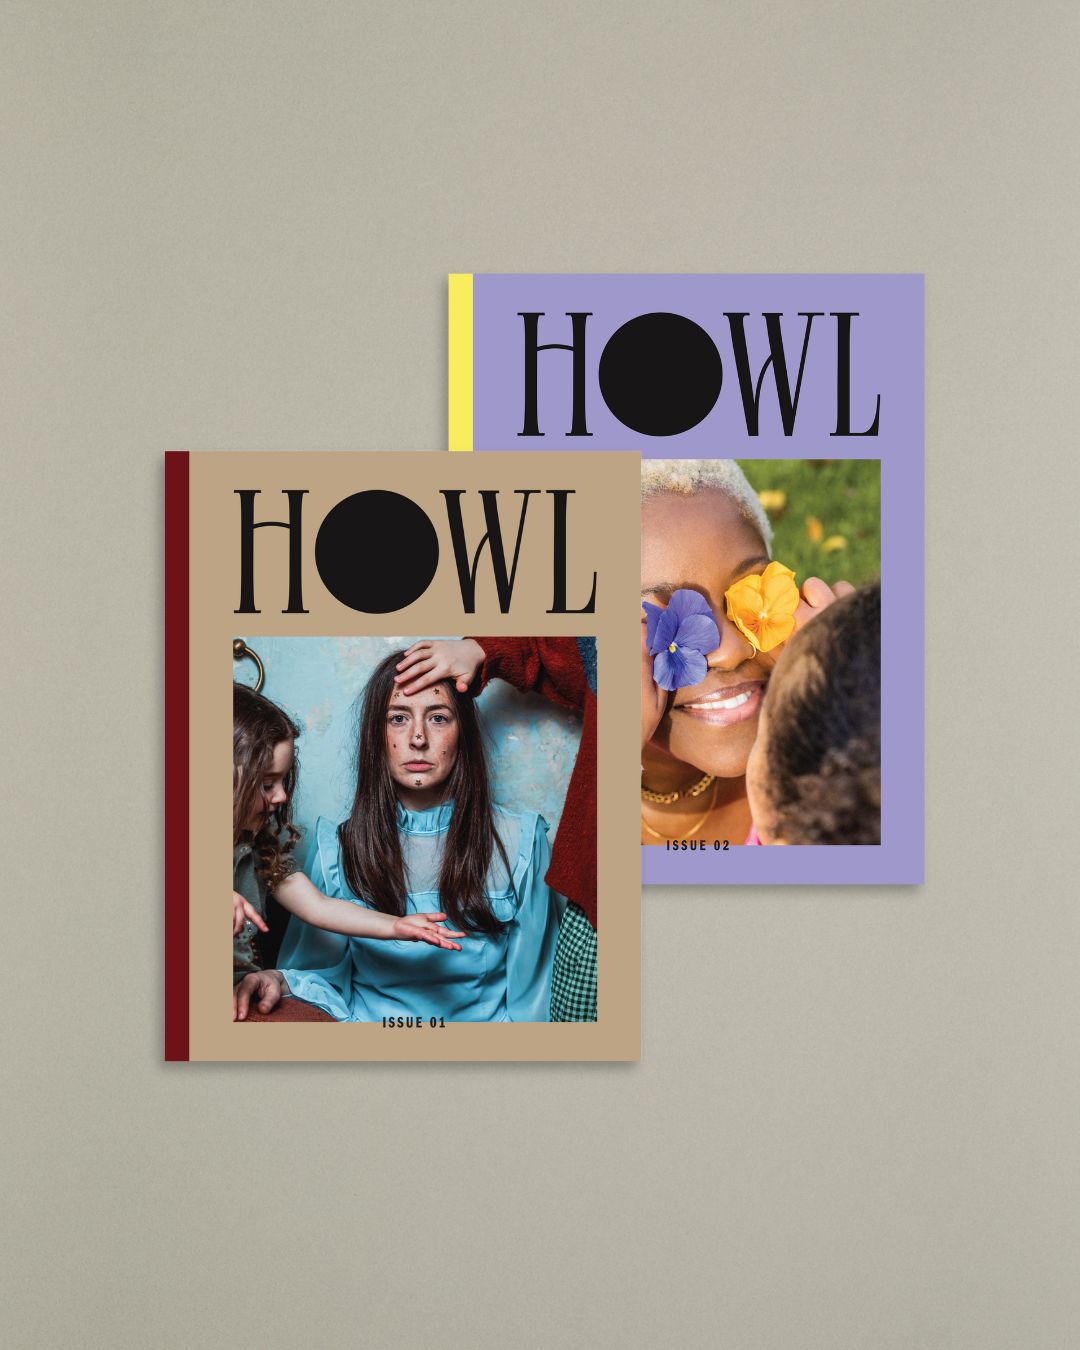 HOWL Issue 01 & 02